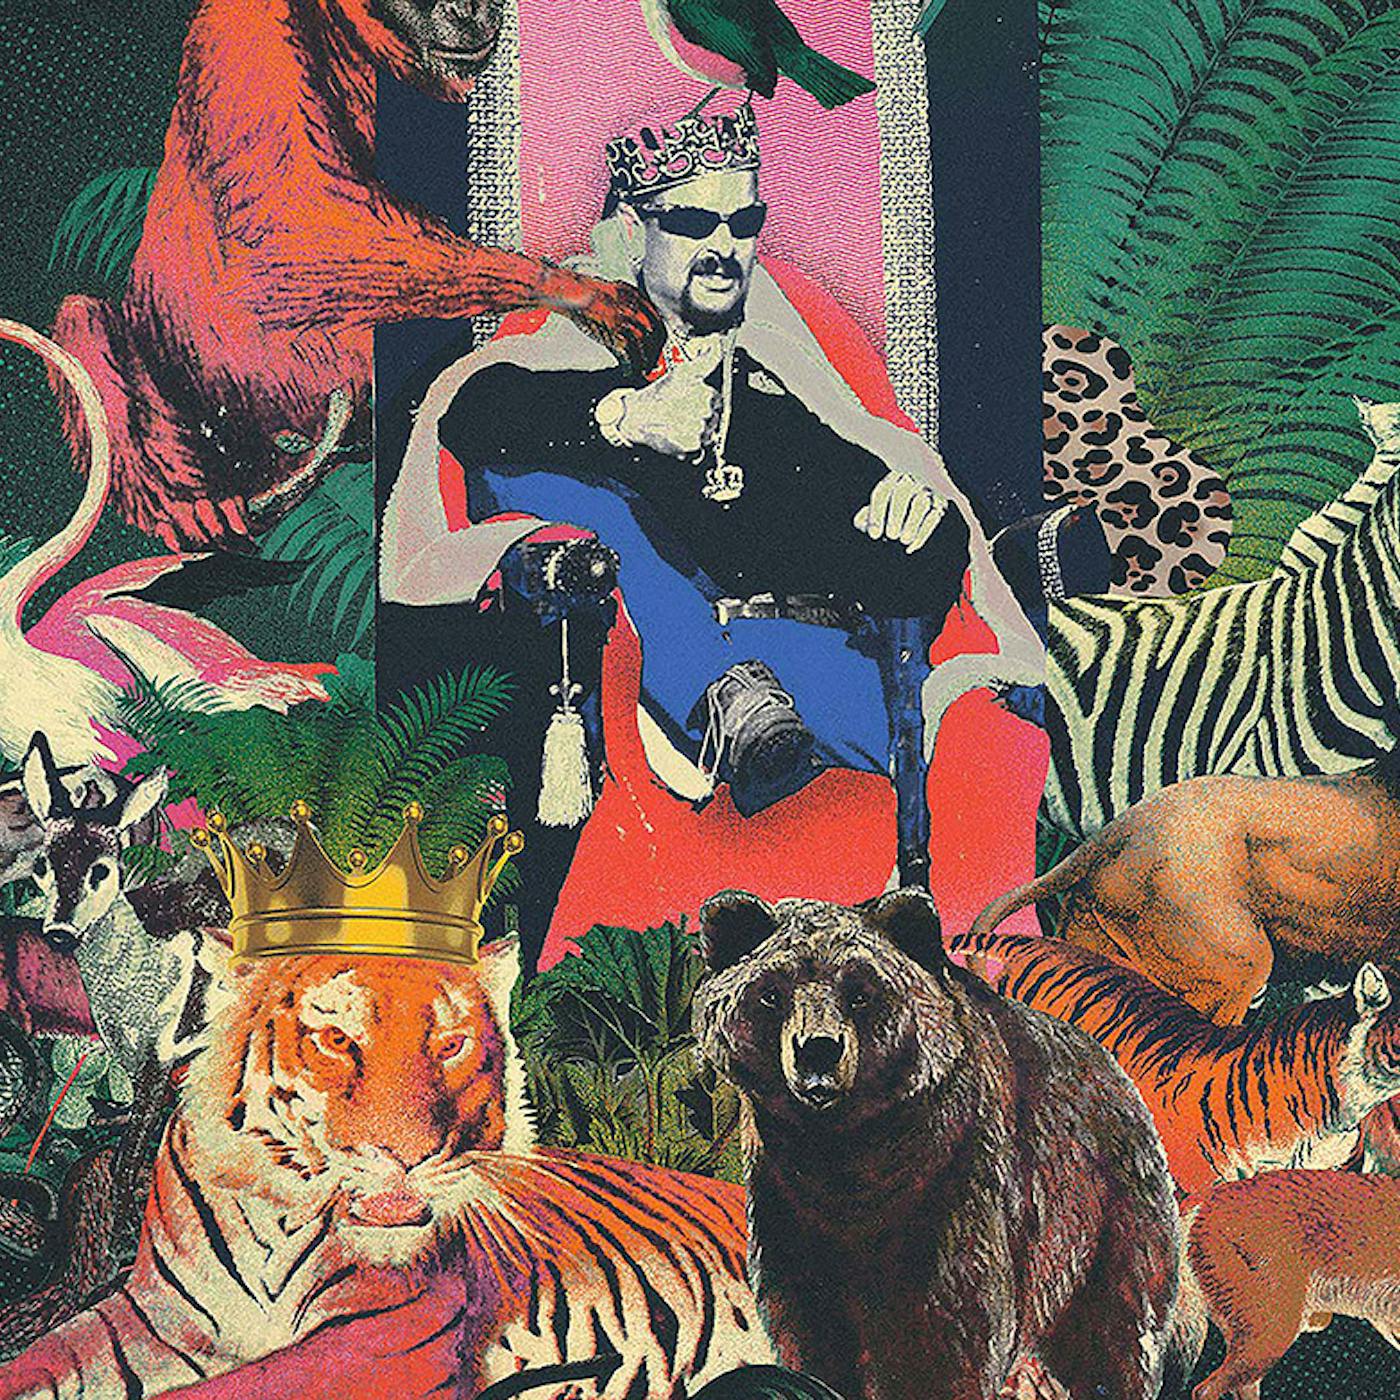 Joe Exotic: A Dark Journey Into the World of a Man Gone Wild – Texas Monthly